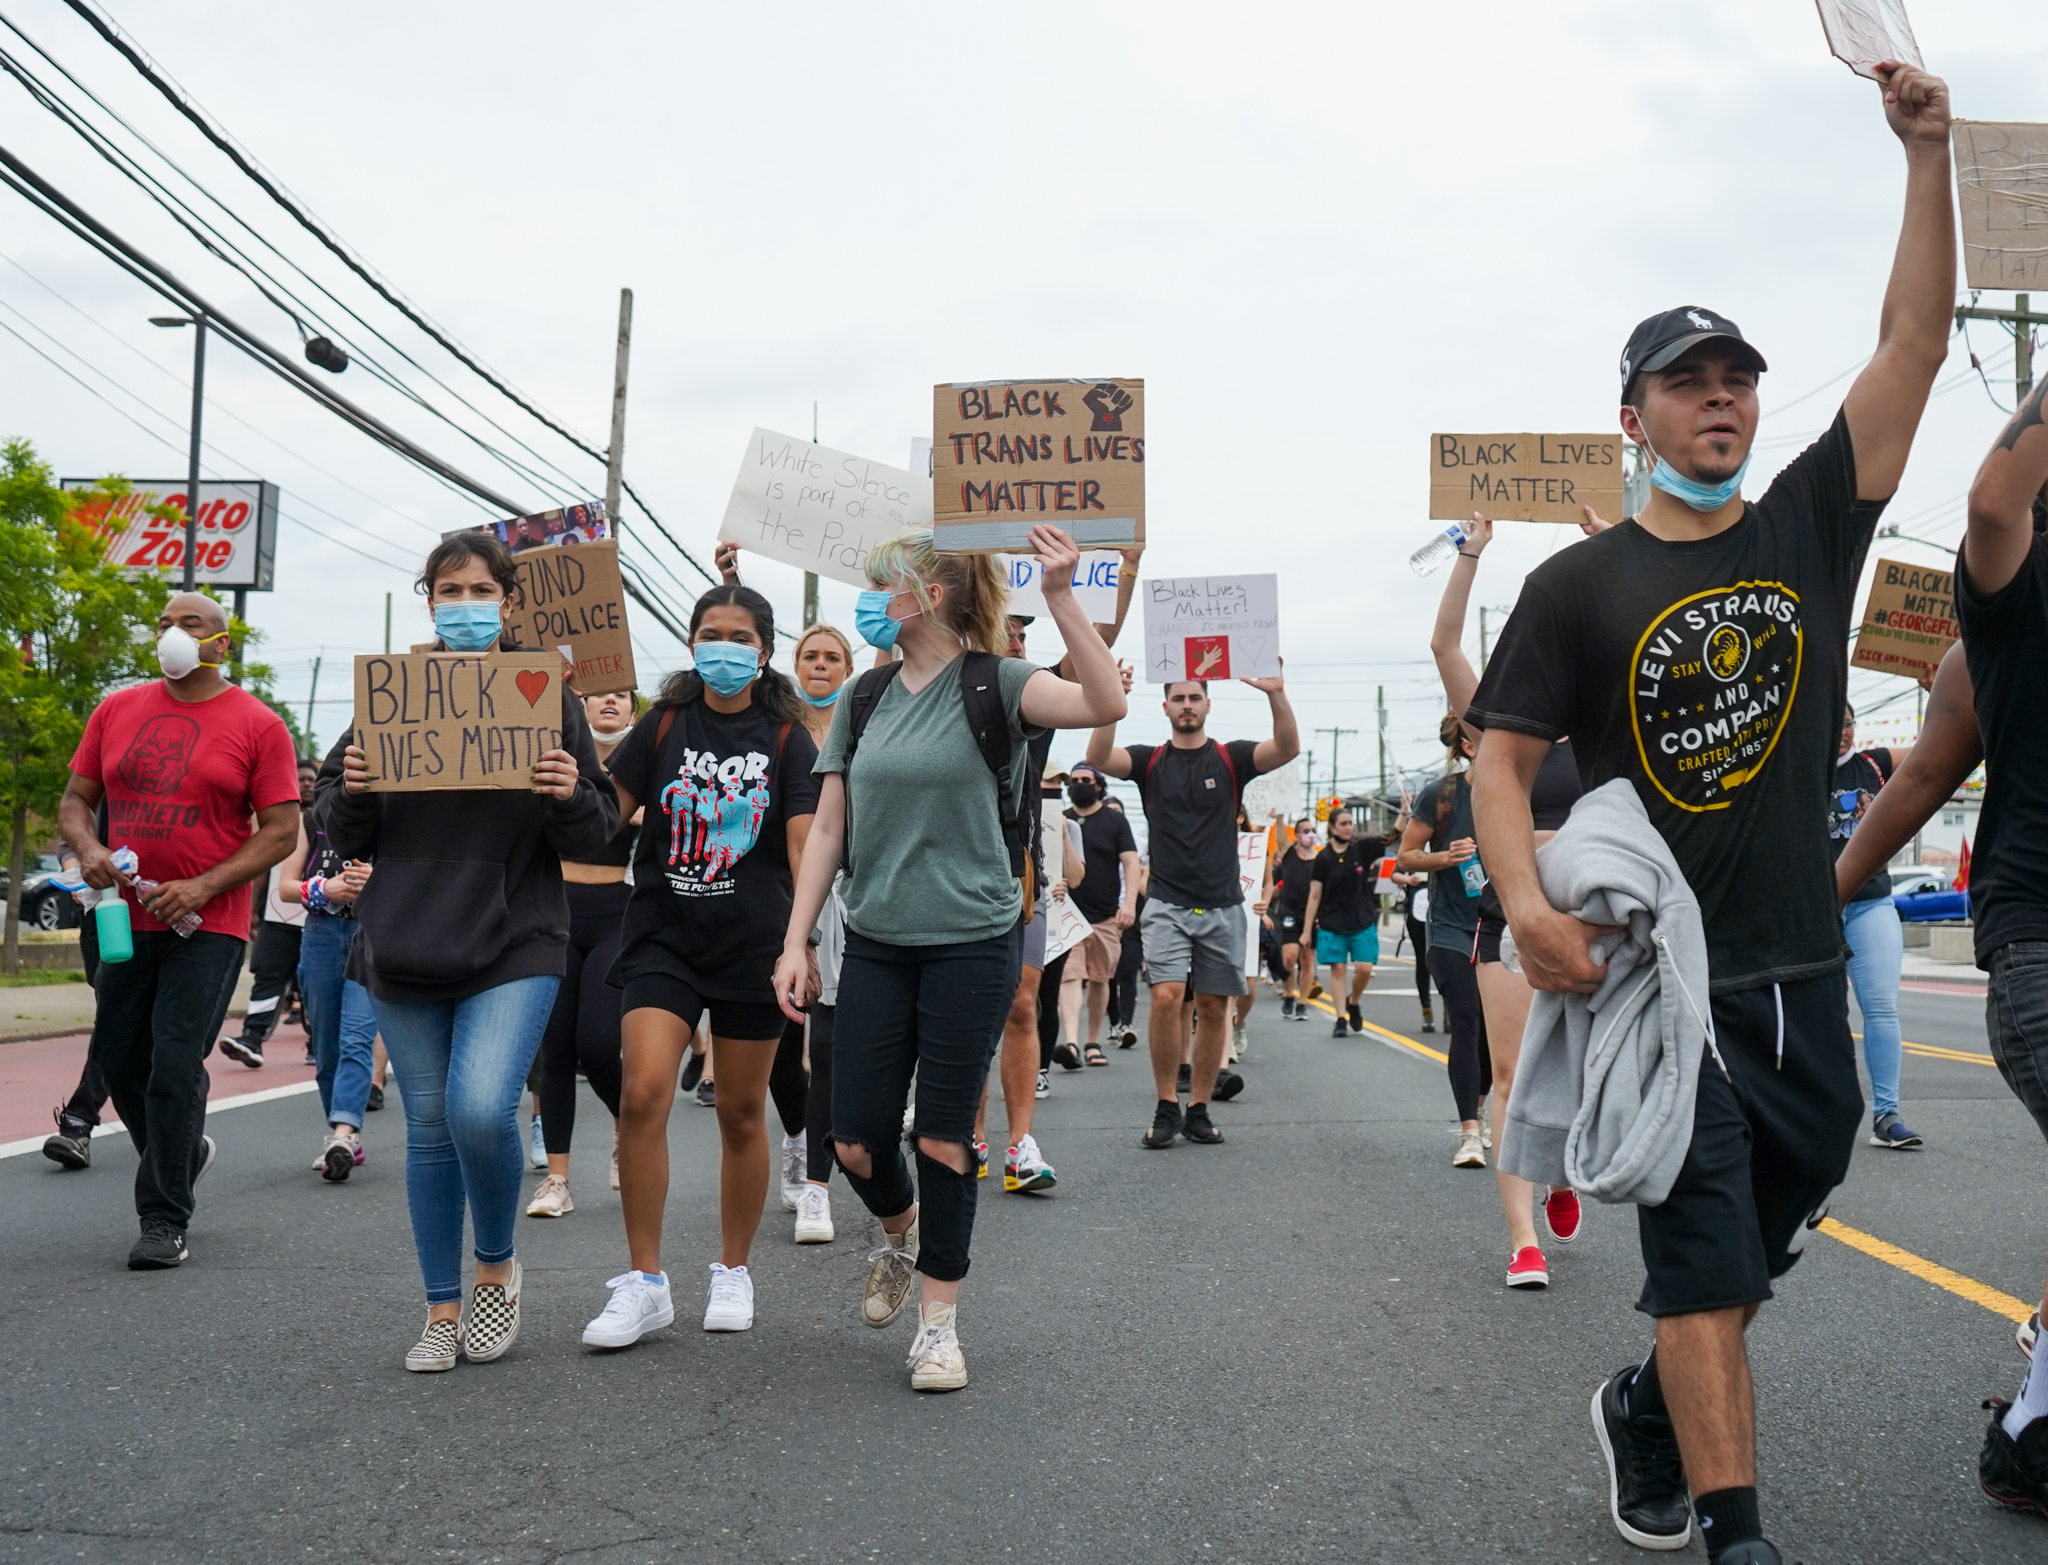 Protesters march along Hylan Blvd. demanding change throughout the Police Department on Friday, June 5, 2020. (Staten Island Advance/Alexandra Salmieri)